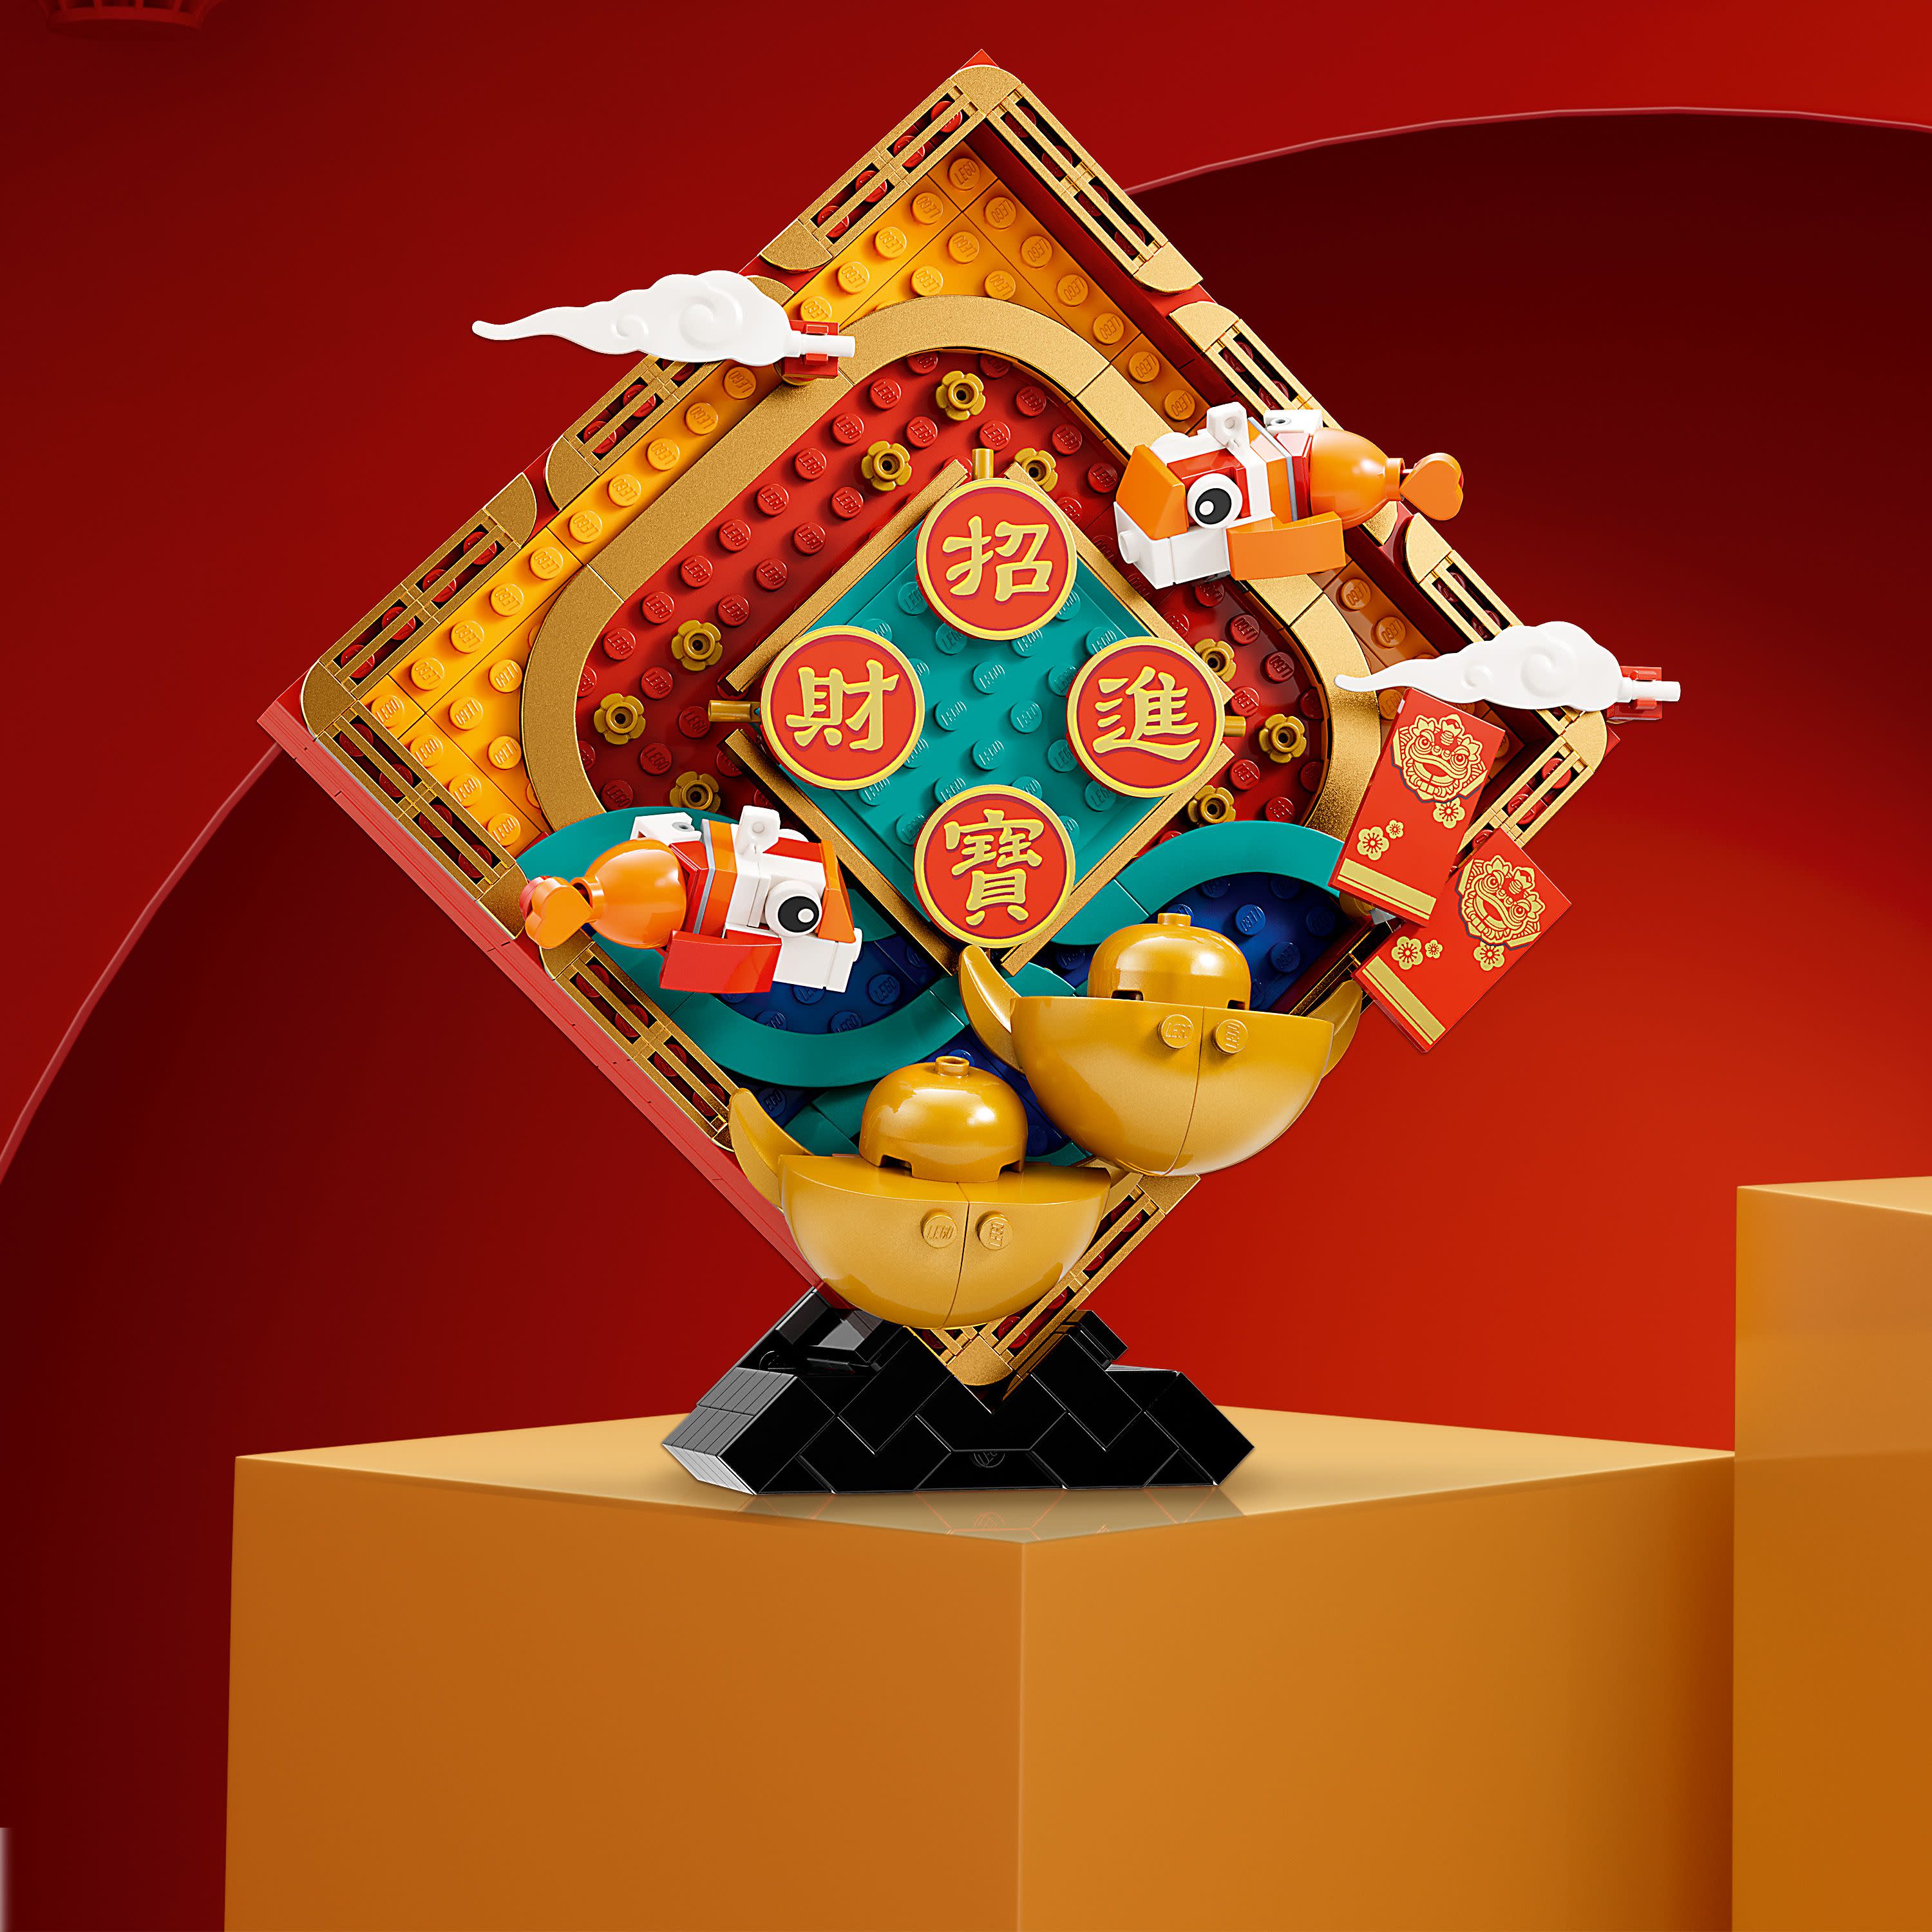 LEGO Lunar New Year Display 80110 Building Toy Set (872 Pieces) - image 5 of 8